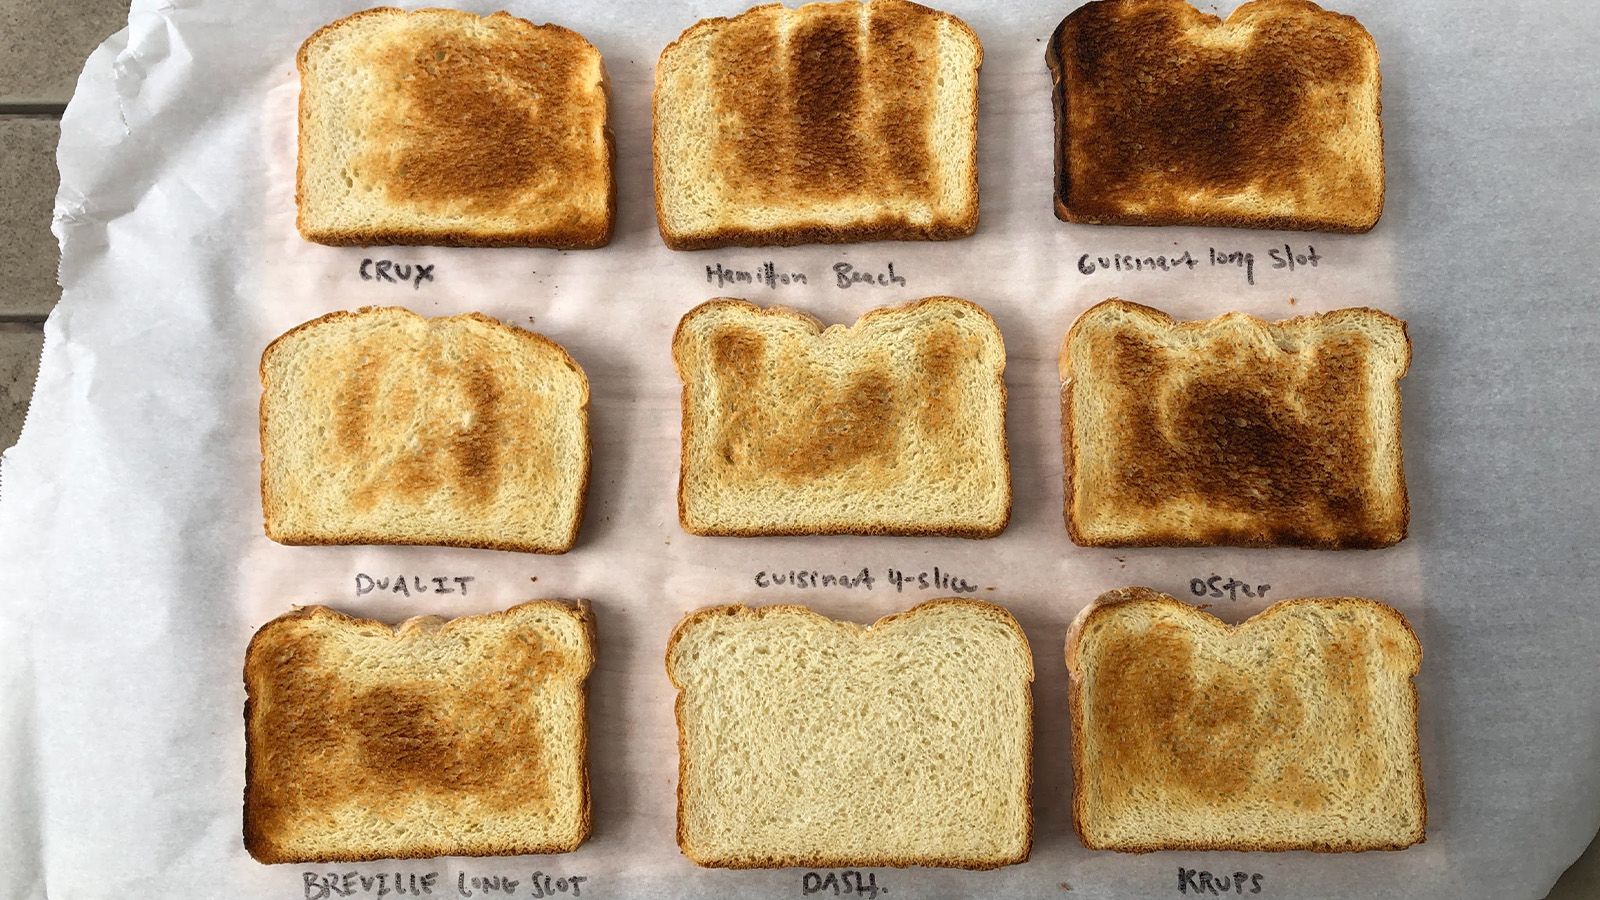 The Best 4-Slice Toasters, According to Our Kitchen Tests